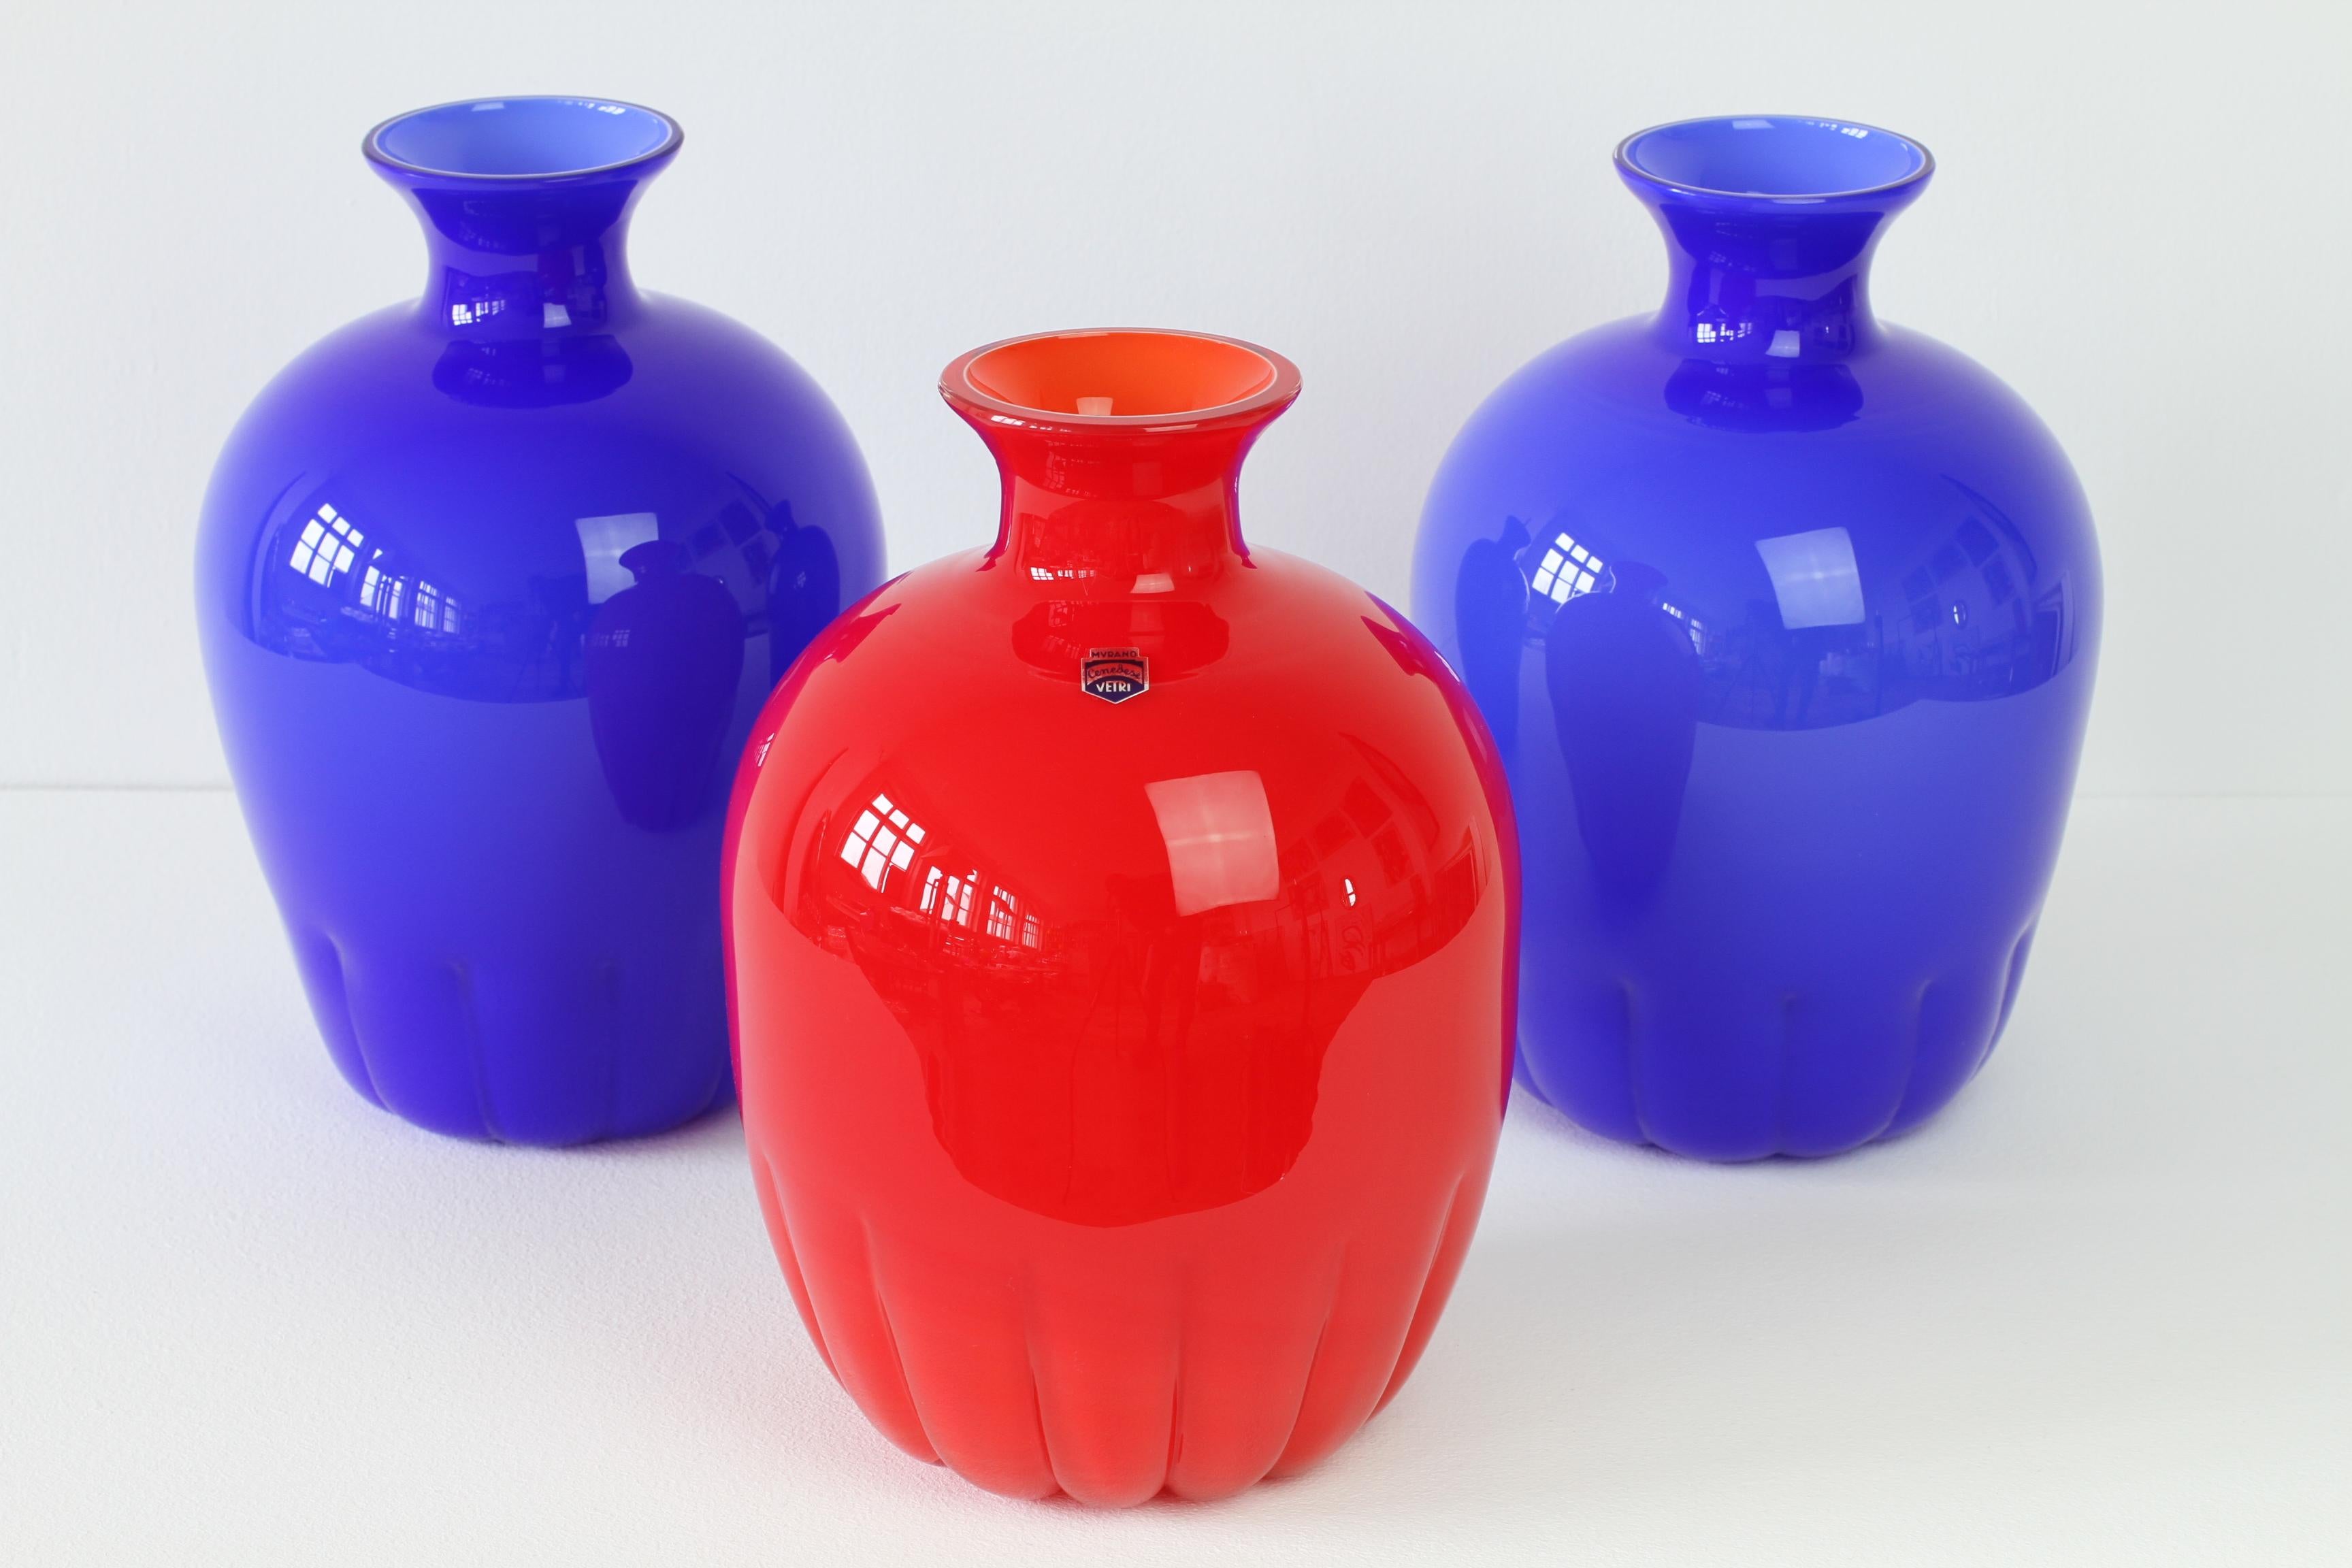 Colourful / colorful, trio, group or ensemble of midcentury red and blue vases by Cenedese Vetri of Murano, Italy. Particularly striking is the narrow necked round form with rippled bases - very similar to Napoleone Martinuzzi bowls for Venini in